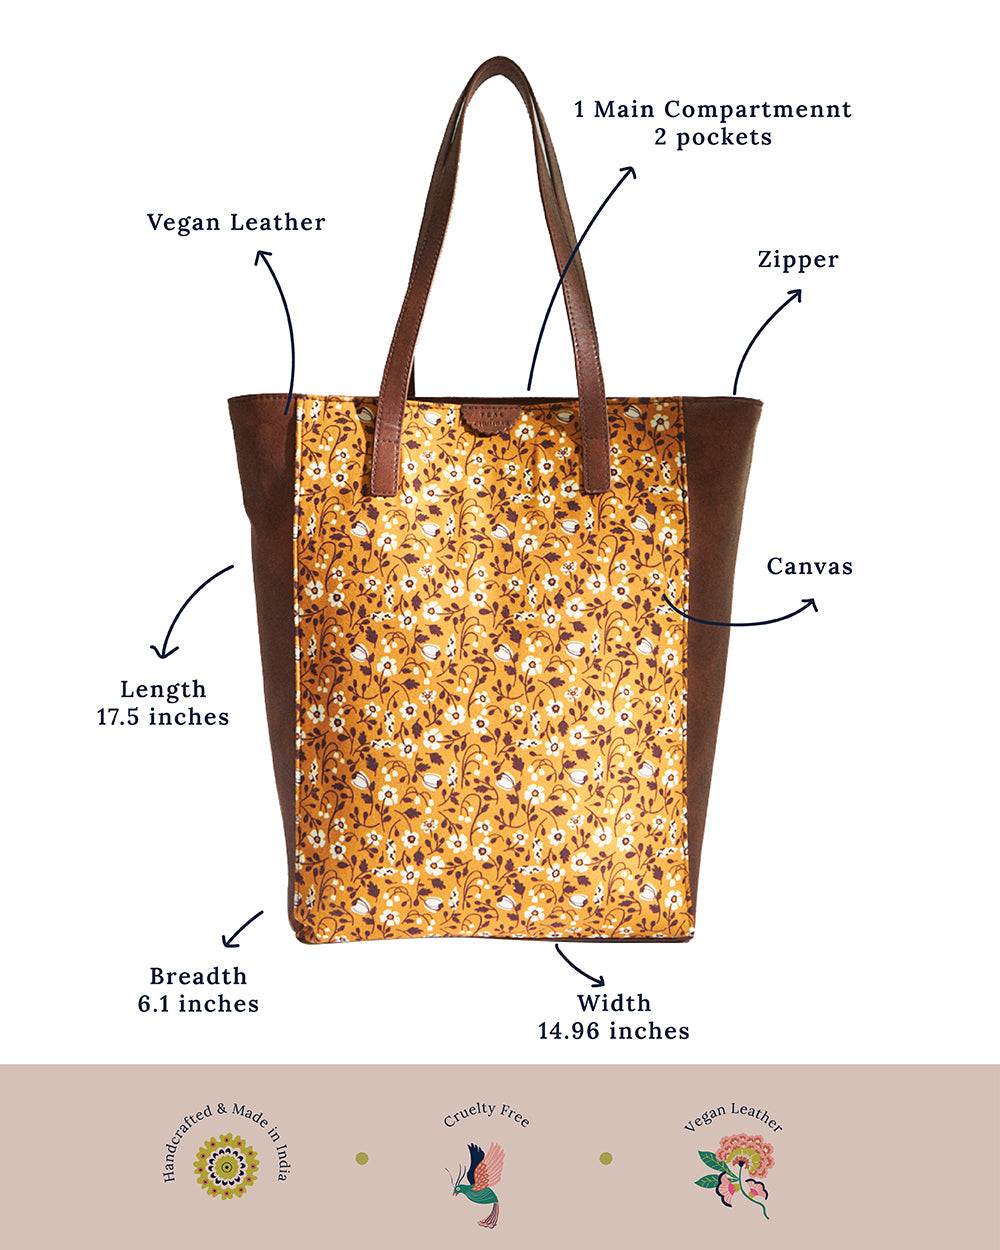 Shopper Tote | Carry Essentials in Style